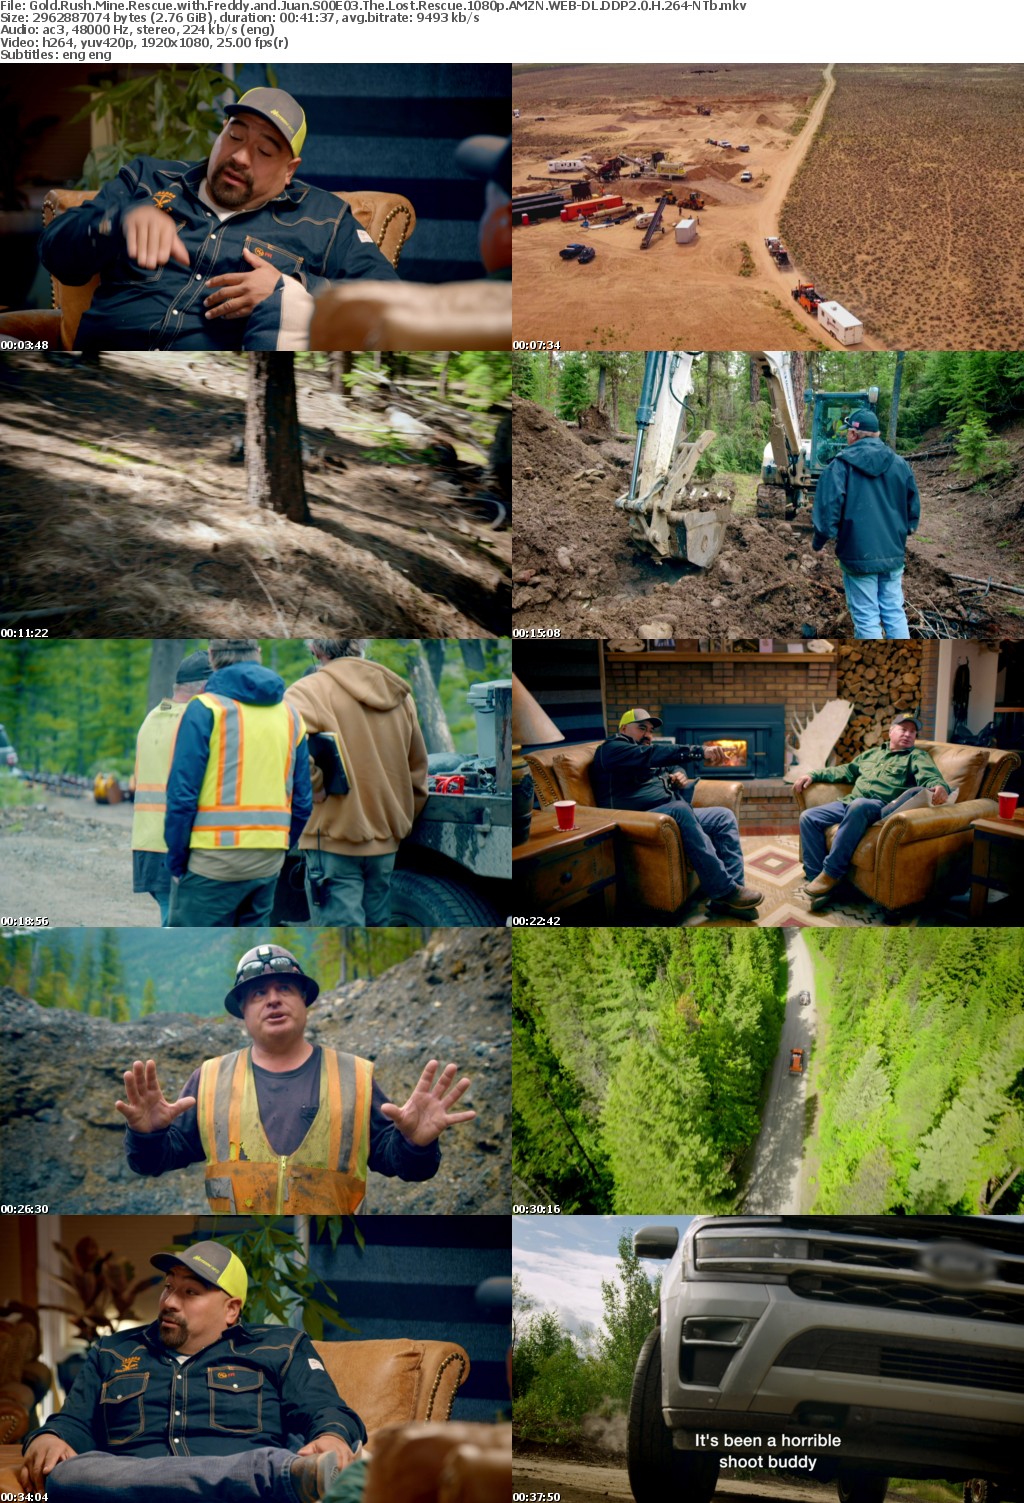 Gold Rush Mine Rescue with Freddy and Juan S00E03 The Lost Rescue 1080p AMZN WEB-DL DDP2 0 H 264-NTb